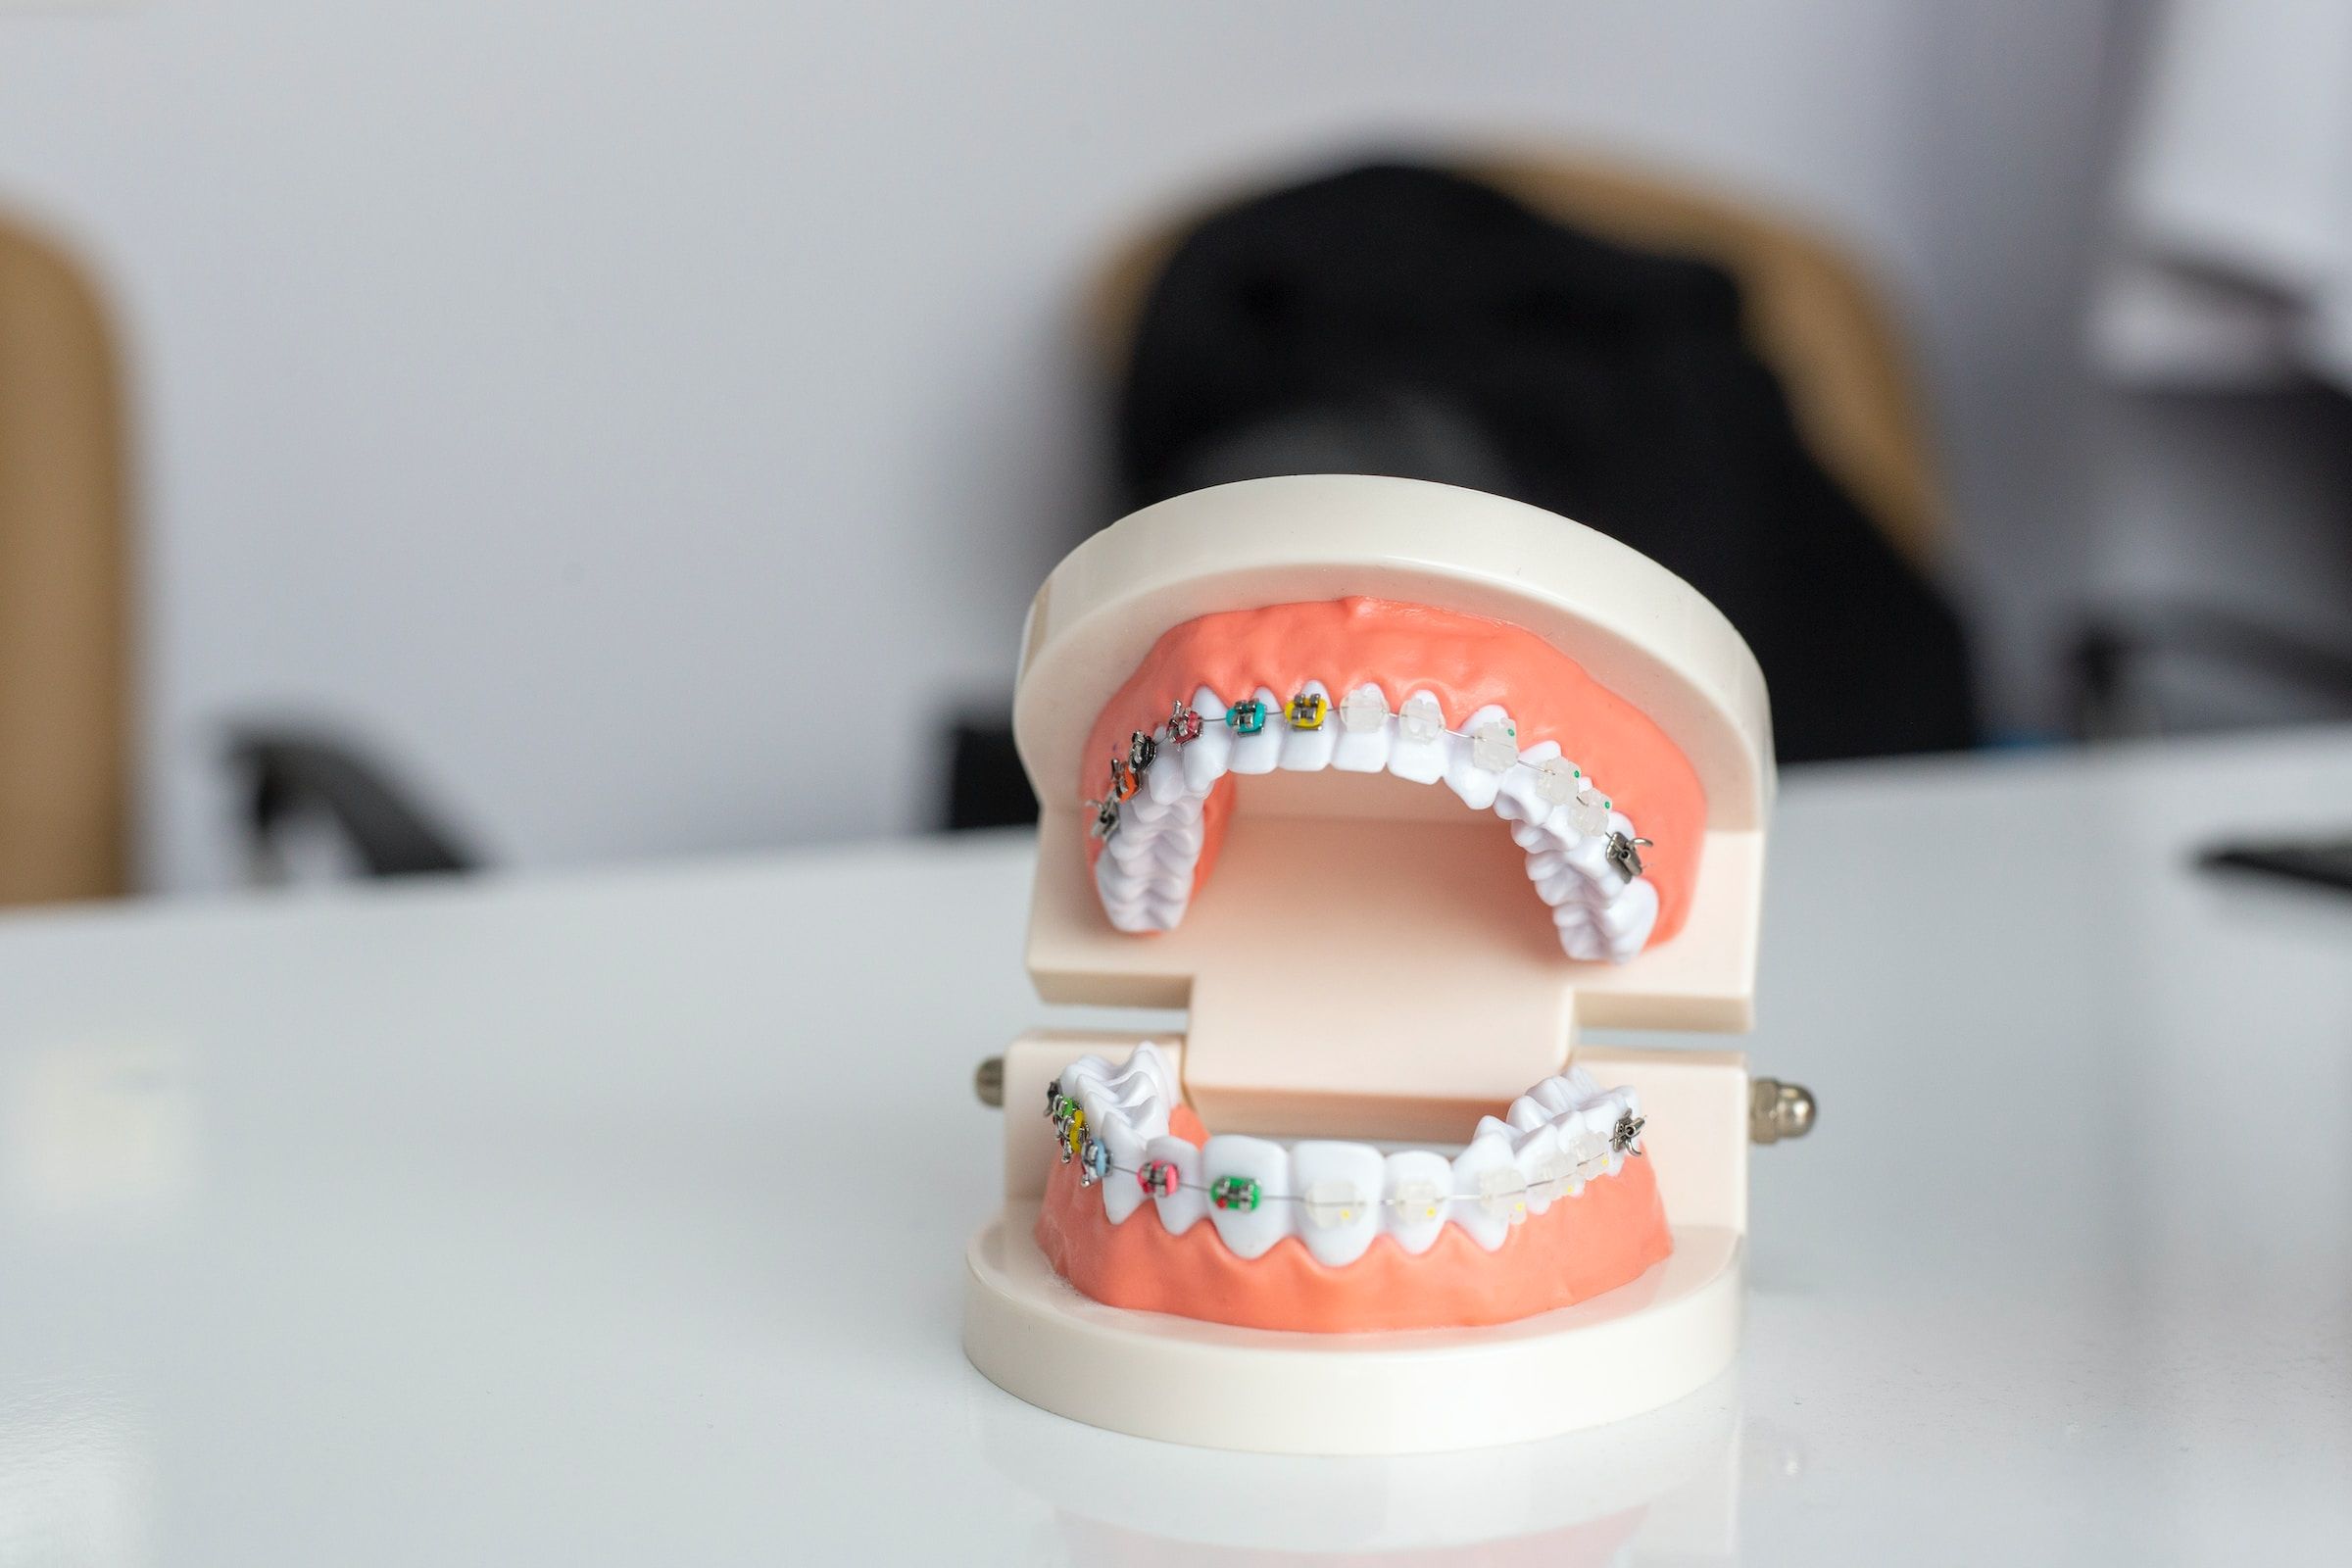 model of the mouth with clear braces and metal braces with colorful bands